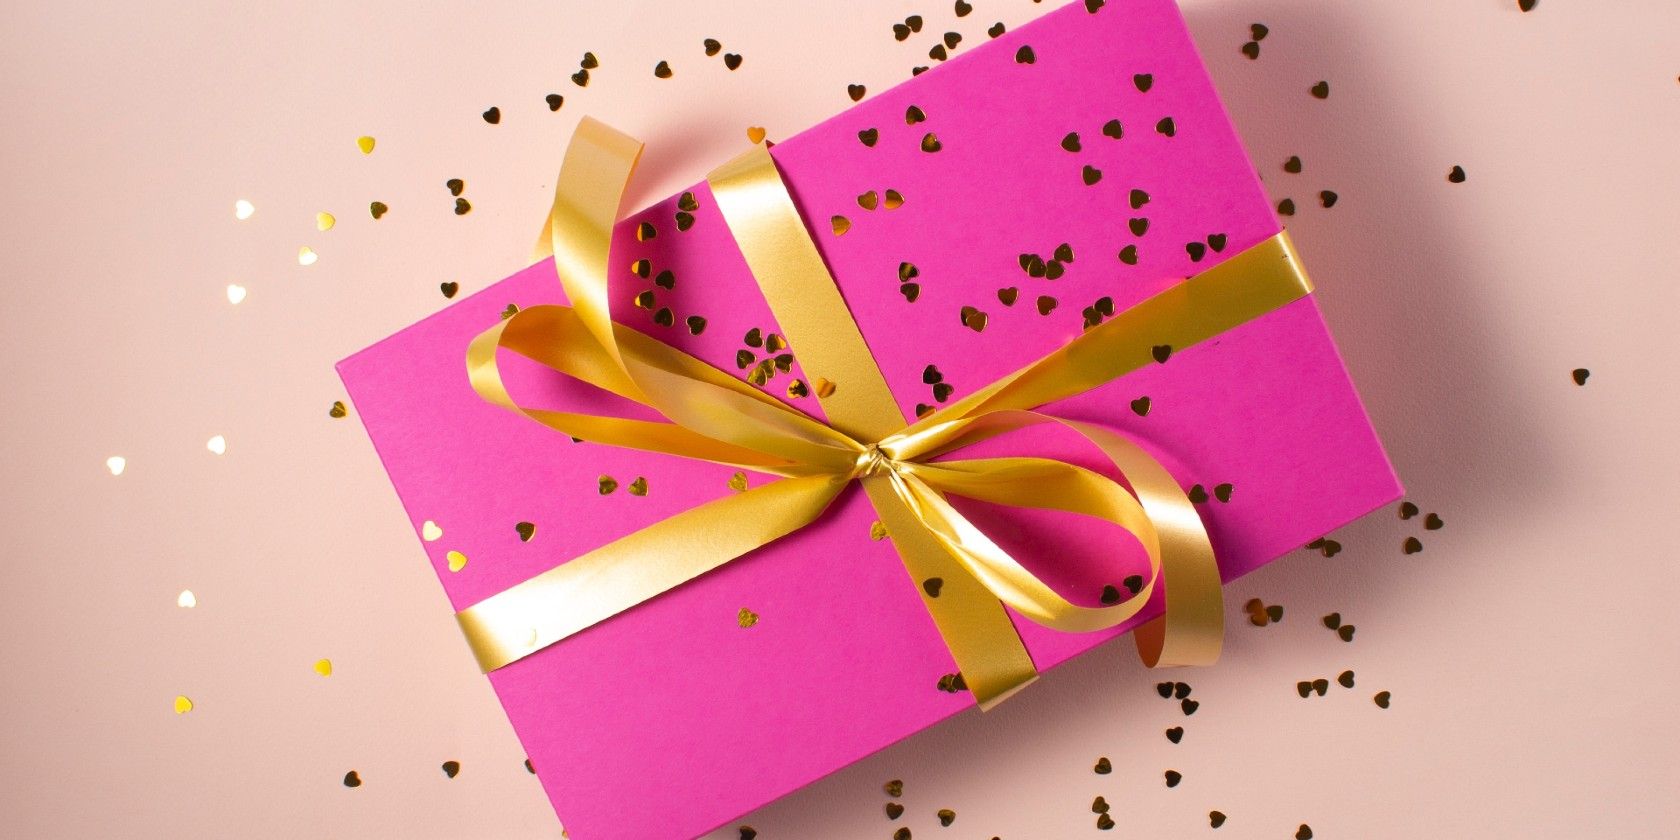 A pink present tied with a golden ribbon sitting on a table.